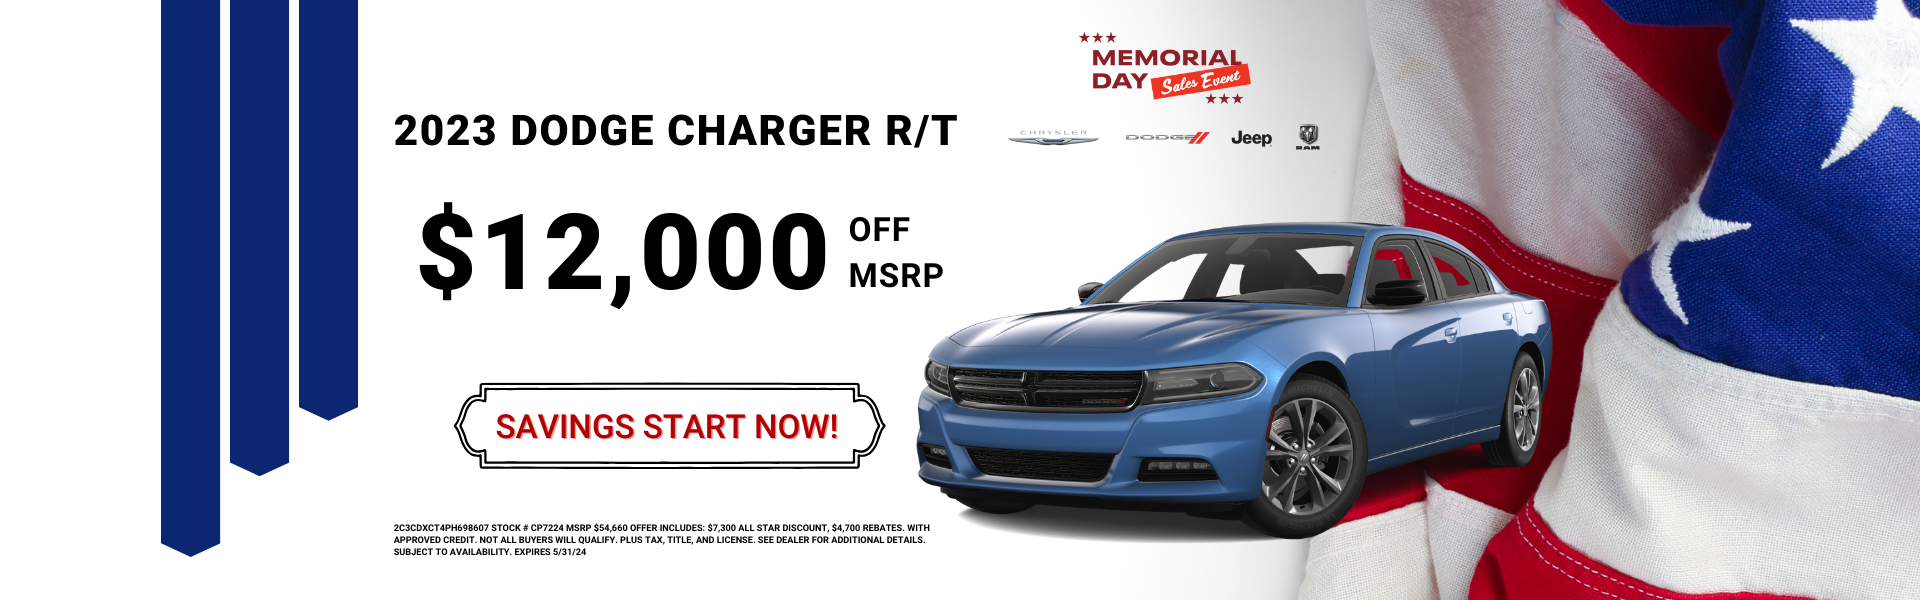 Charger Offer Memorial Day